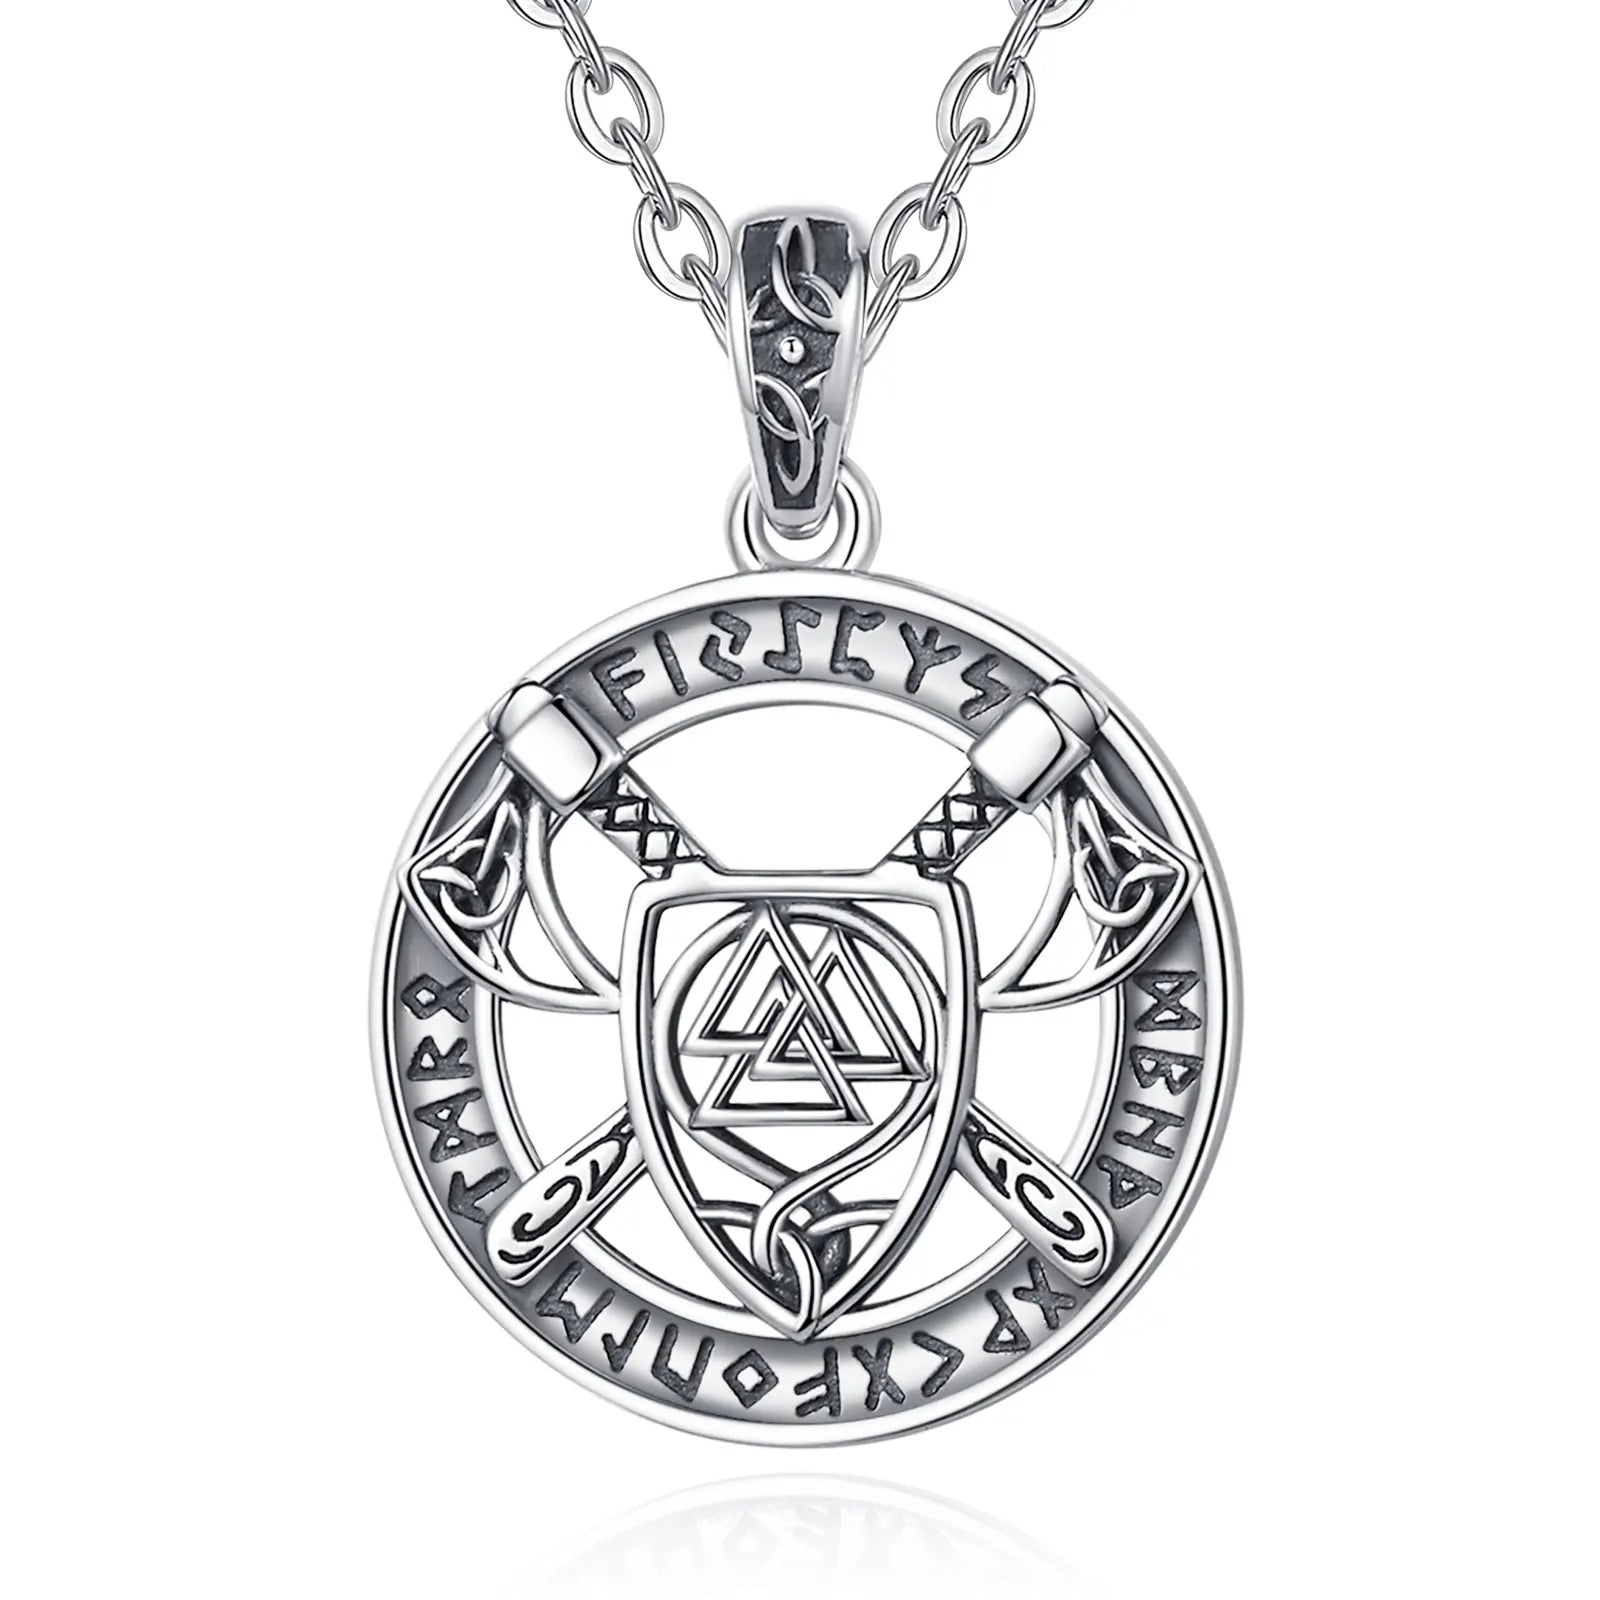 The Valknut in Shield 925 Sterling Silver Necklace